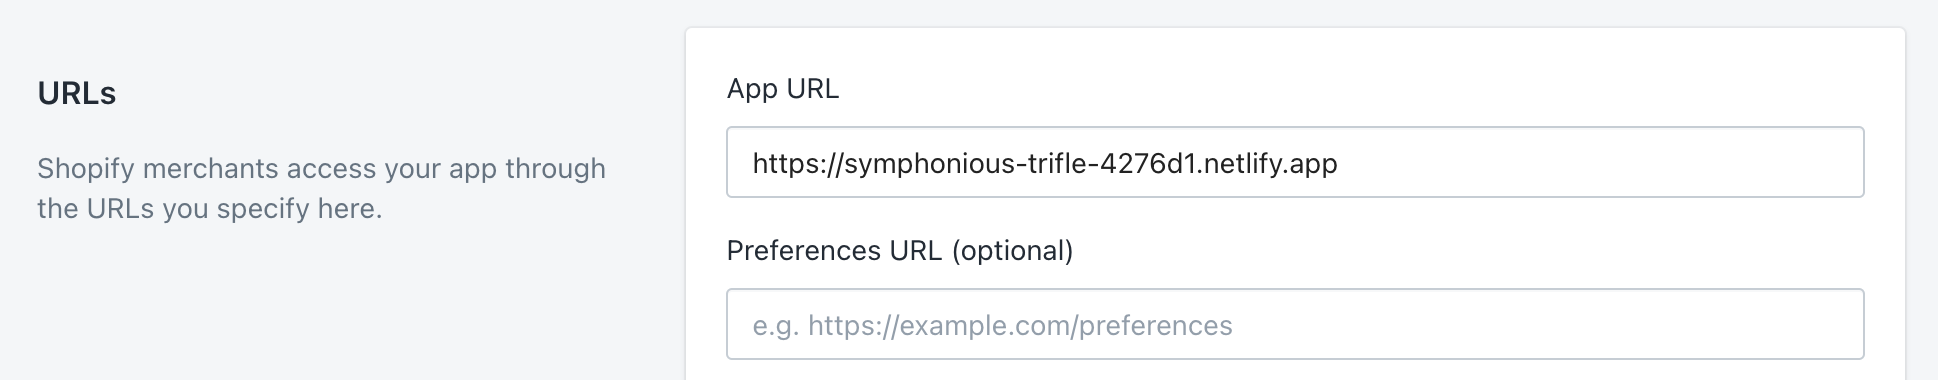 Shopify app URLs section in Configuration